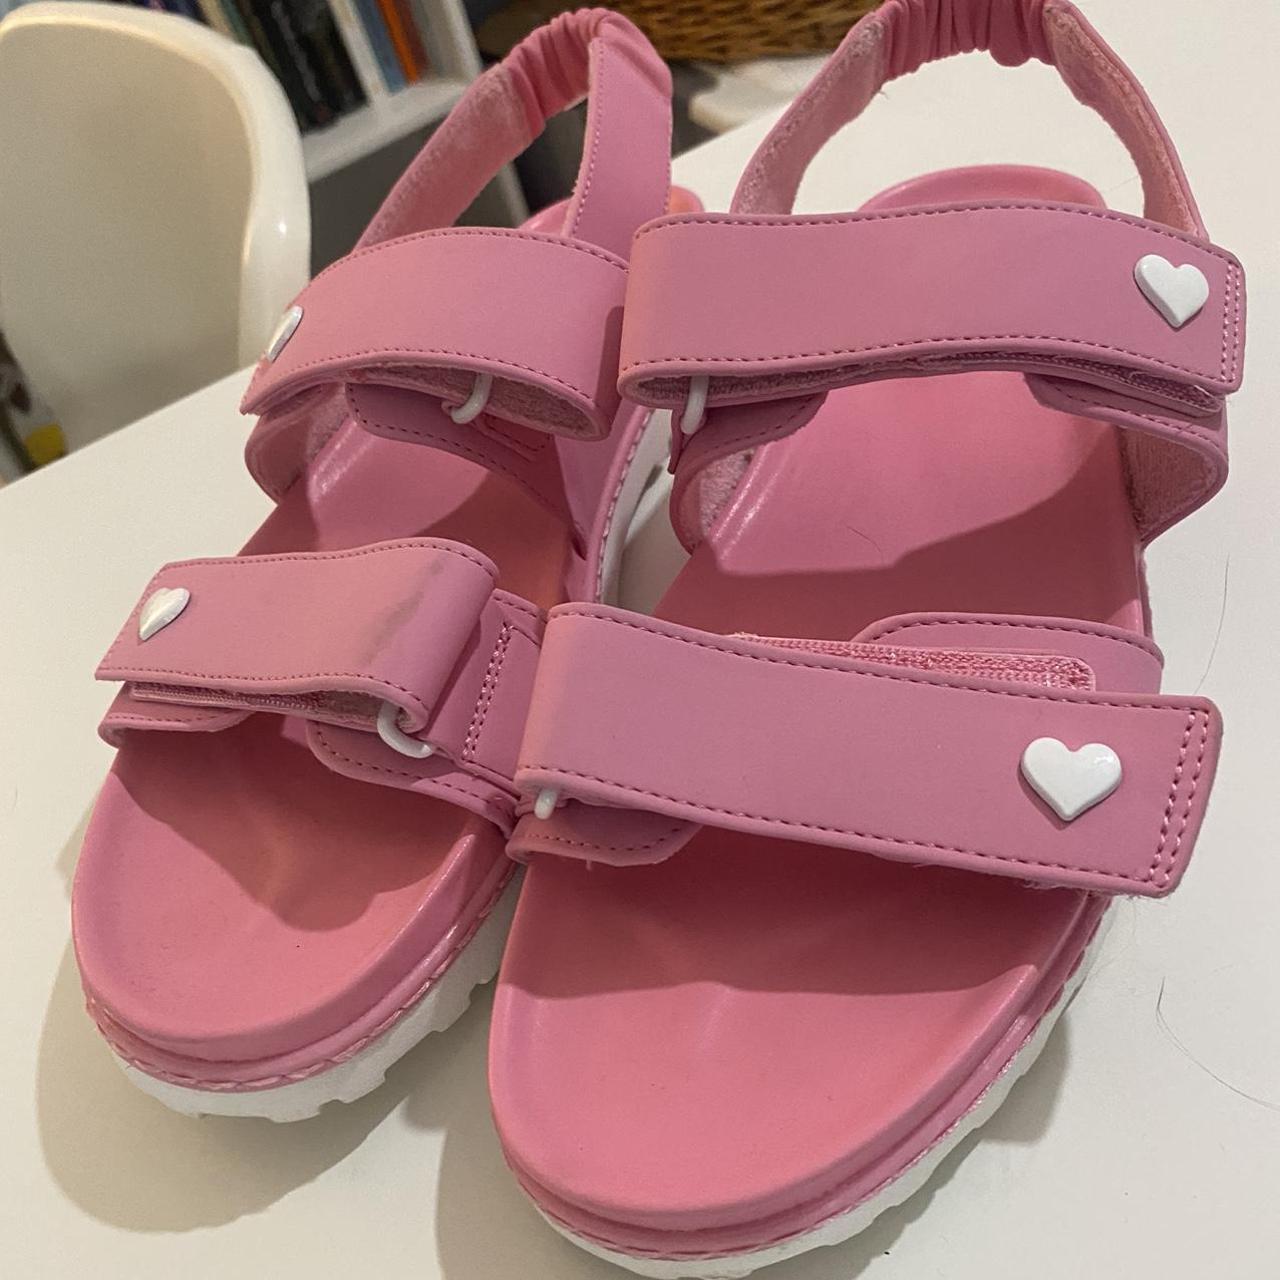 Target Women's Pink and White Sandals | Depop